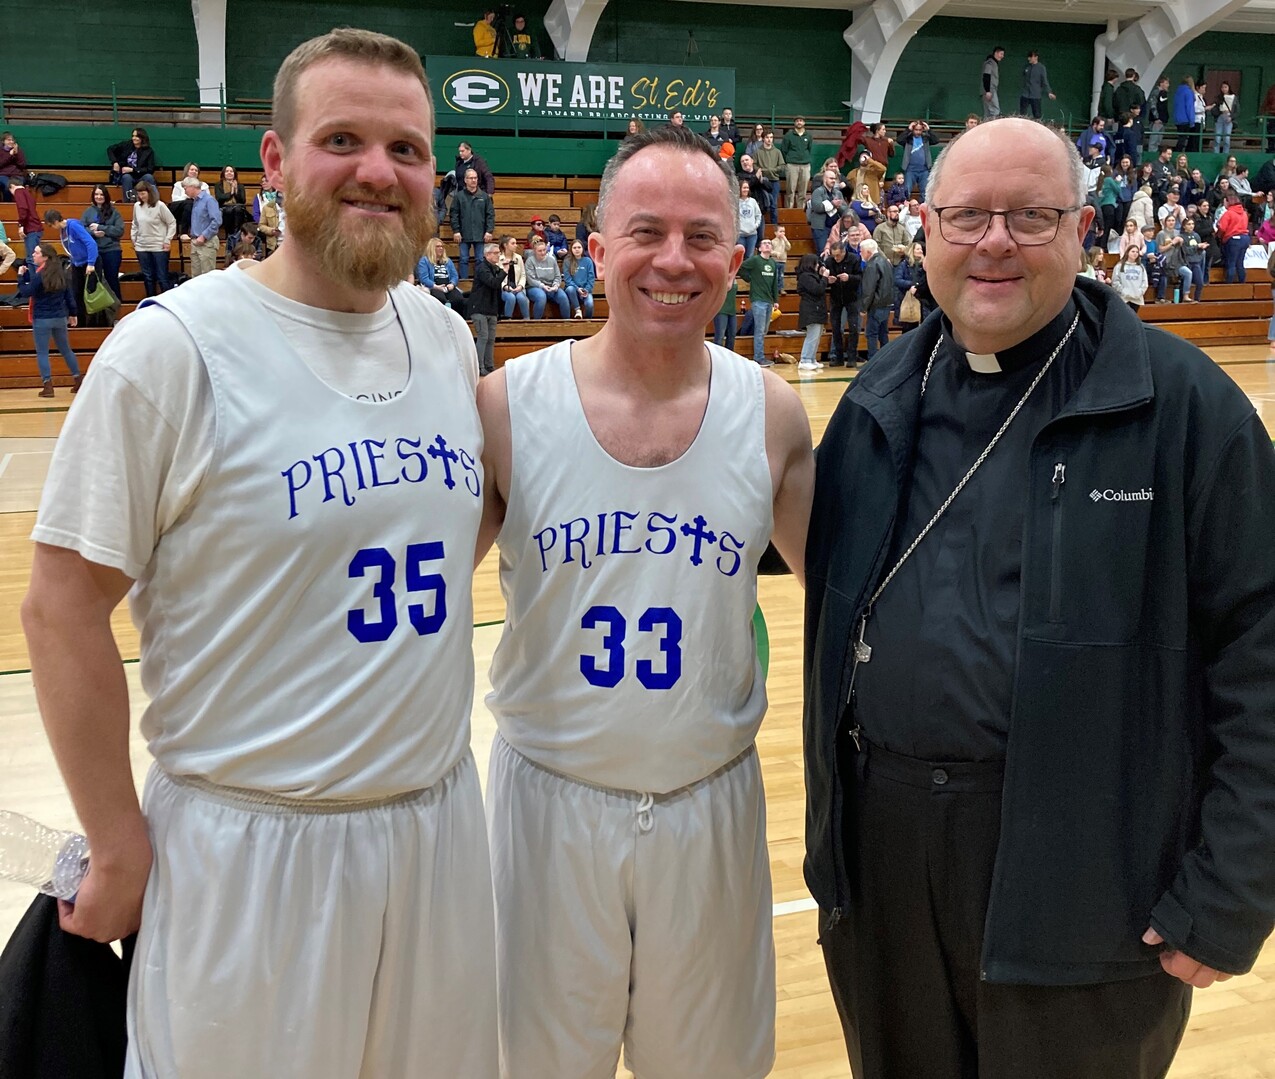 Seminarians are victorious in annual Priests vs Seminarians basketball game